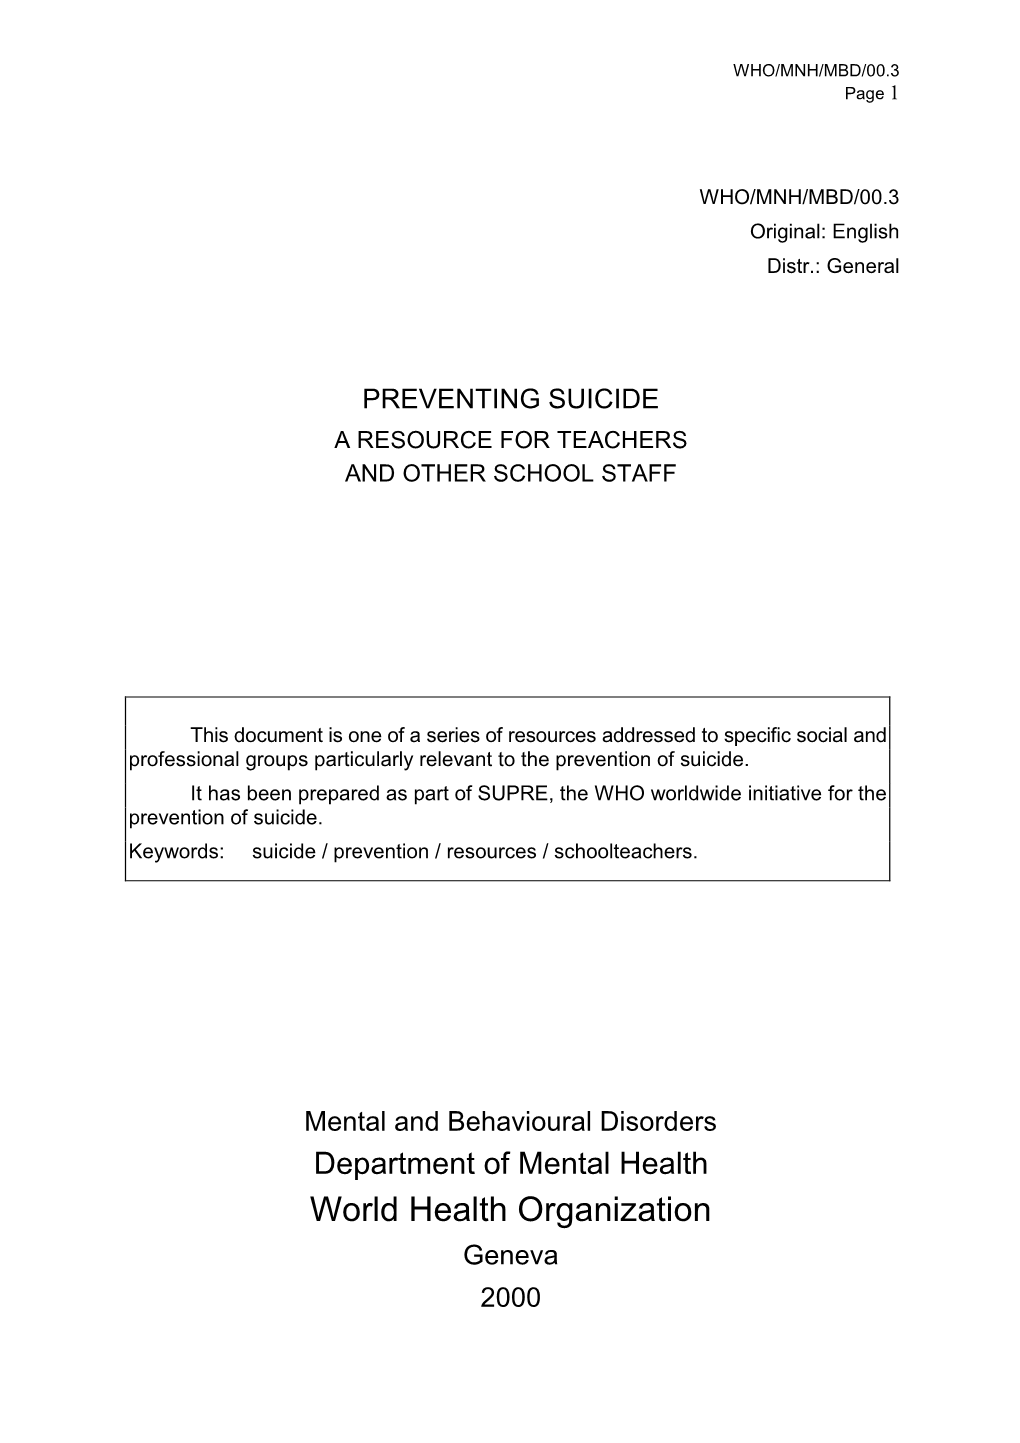 Preventing Suicide a Resource for Teachers and Other School Staff